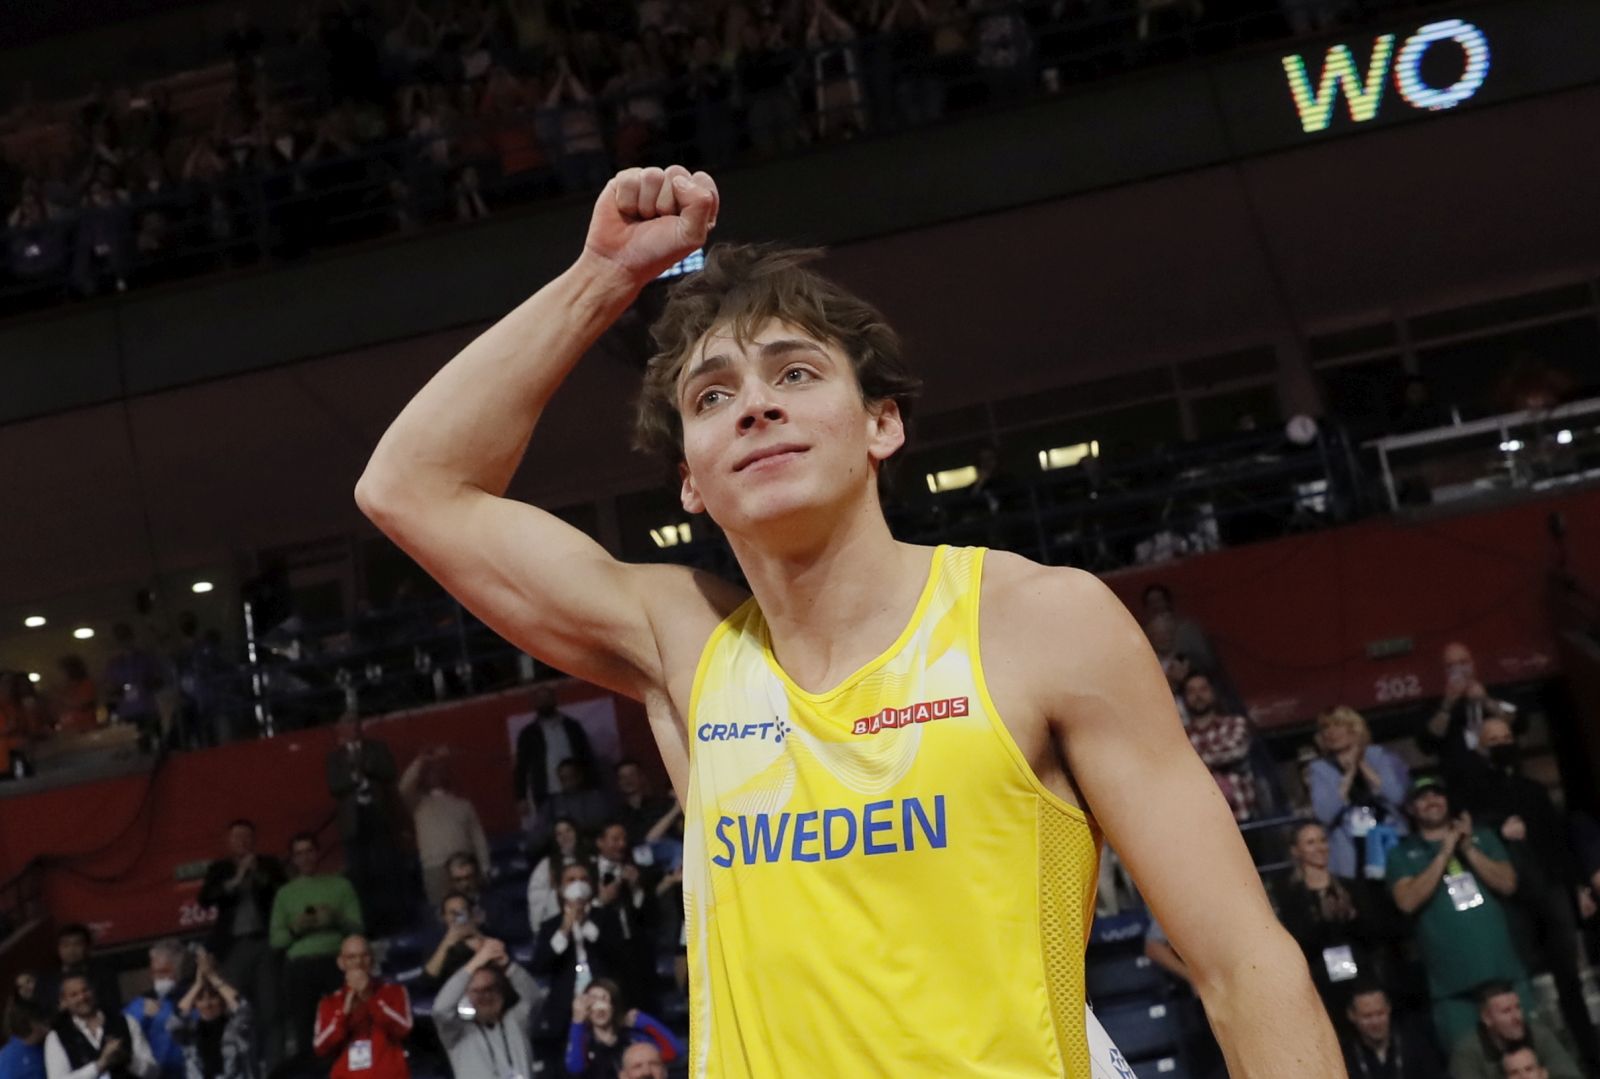 epa09839215 Armand Duplantis of Sweden celebrates after setting a new World Record mark of 6.20m during the men's Pole Vault final at the IAAF World Athletics Indoor Championships in Belgrade, Serbia, 20 March 2022.  EPA/ROBERT GHEMENT